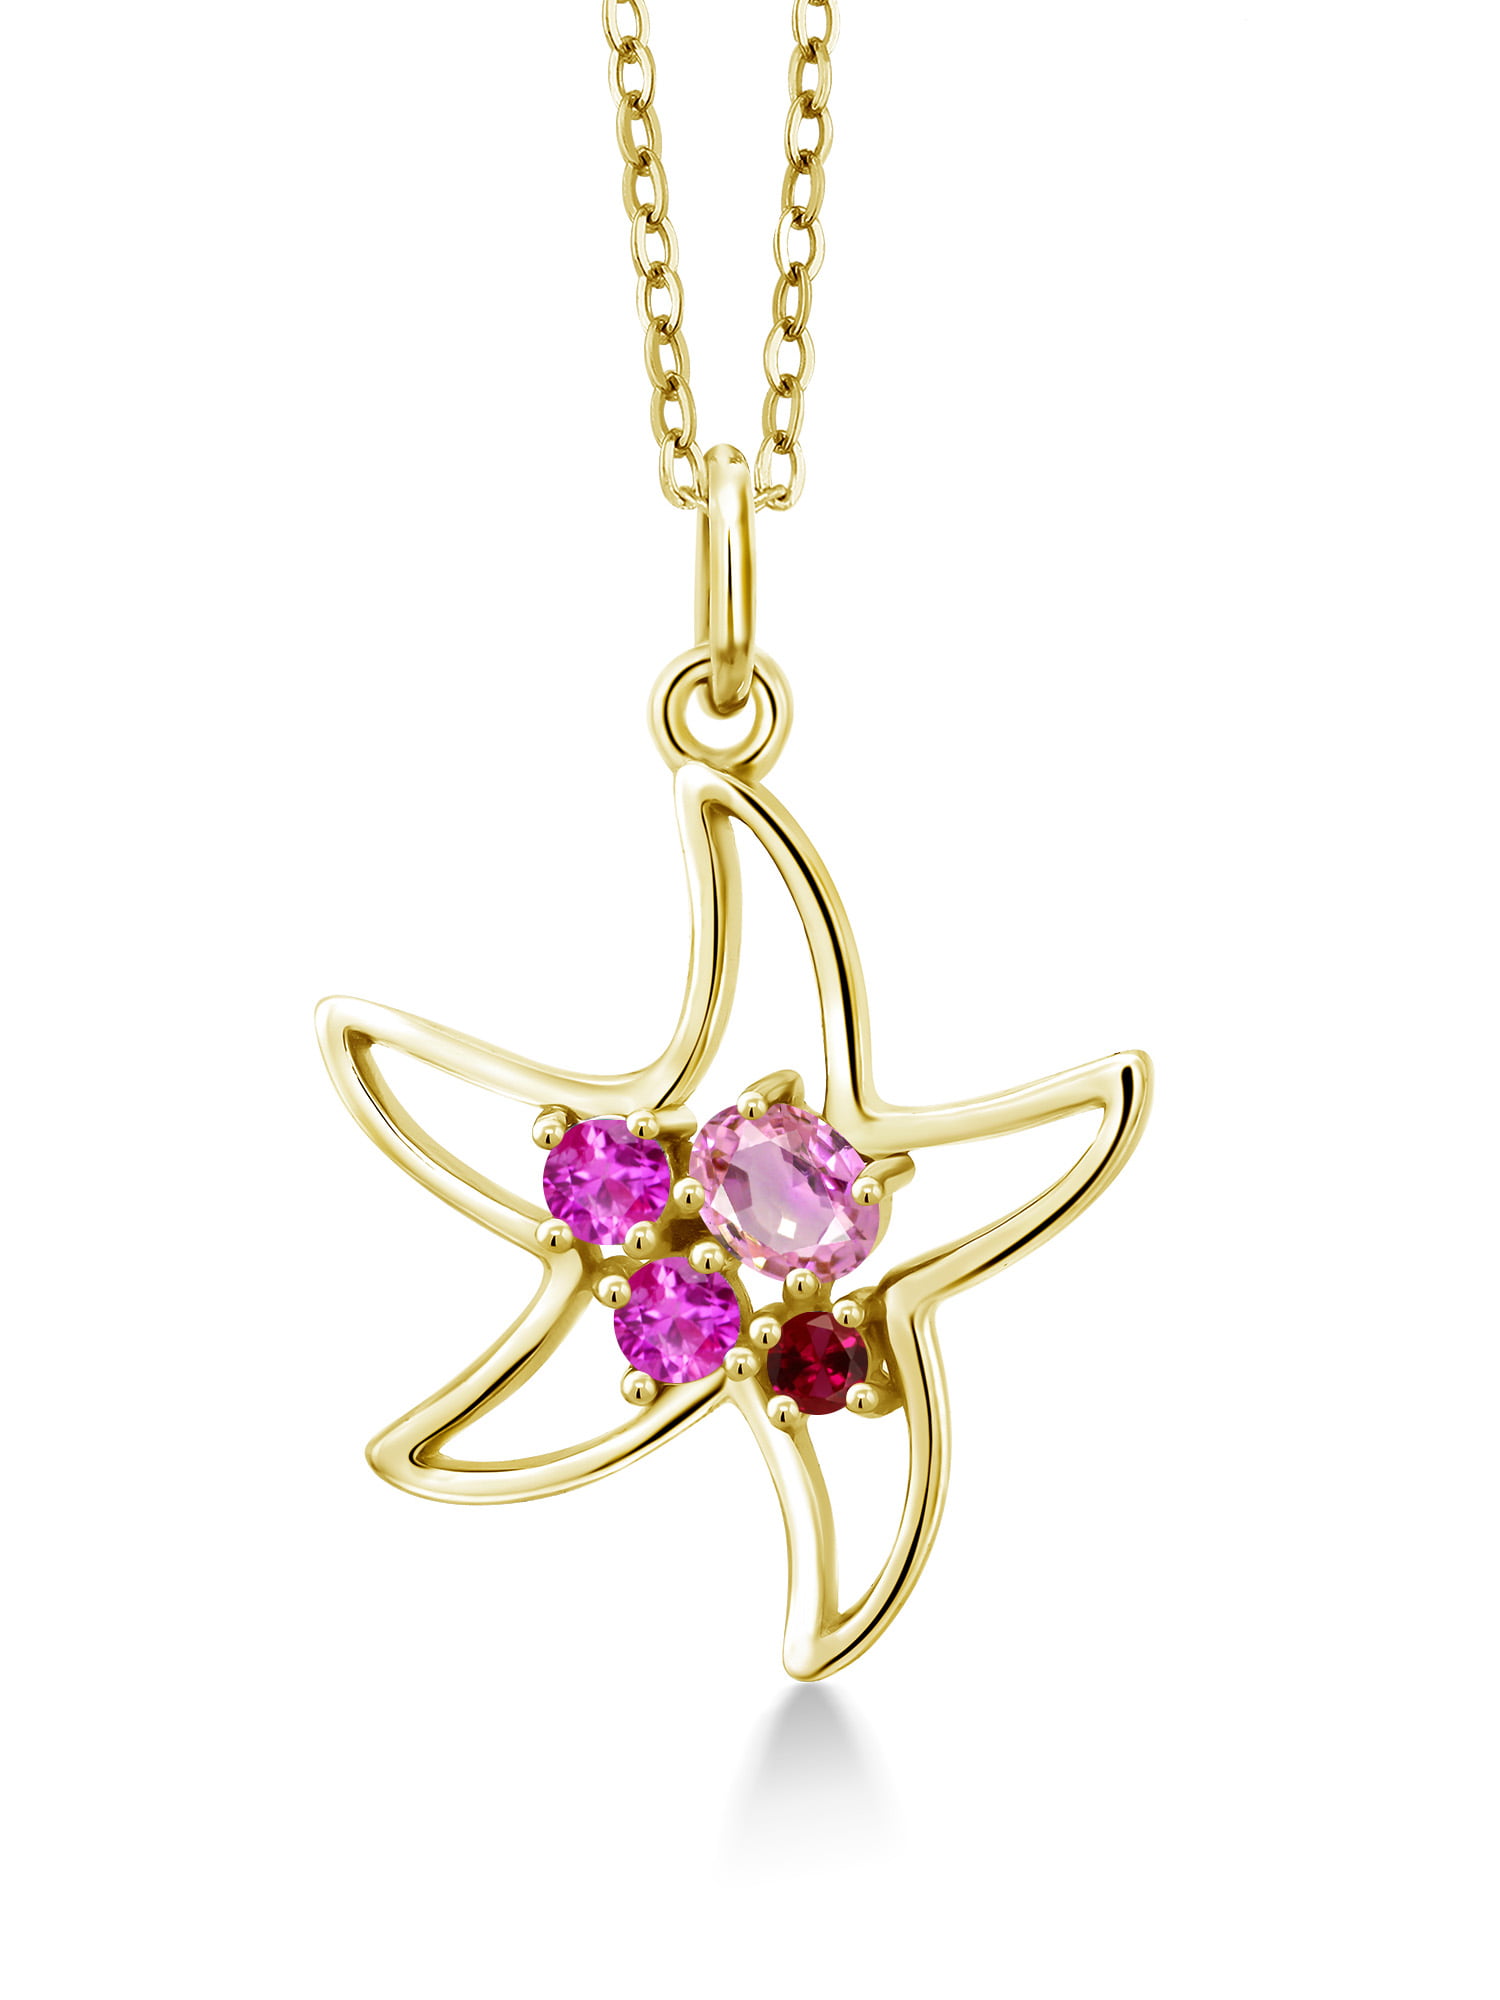 Gem Stone King 0.37 Ct Oval Blue Sapphire Yellow Sapphire 925 Sterling Silver Starfish Necklace 